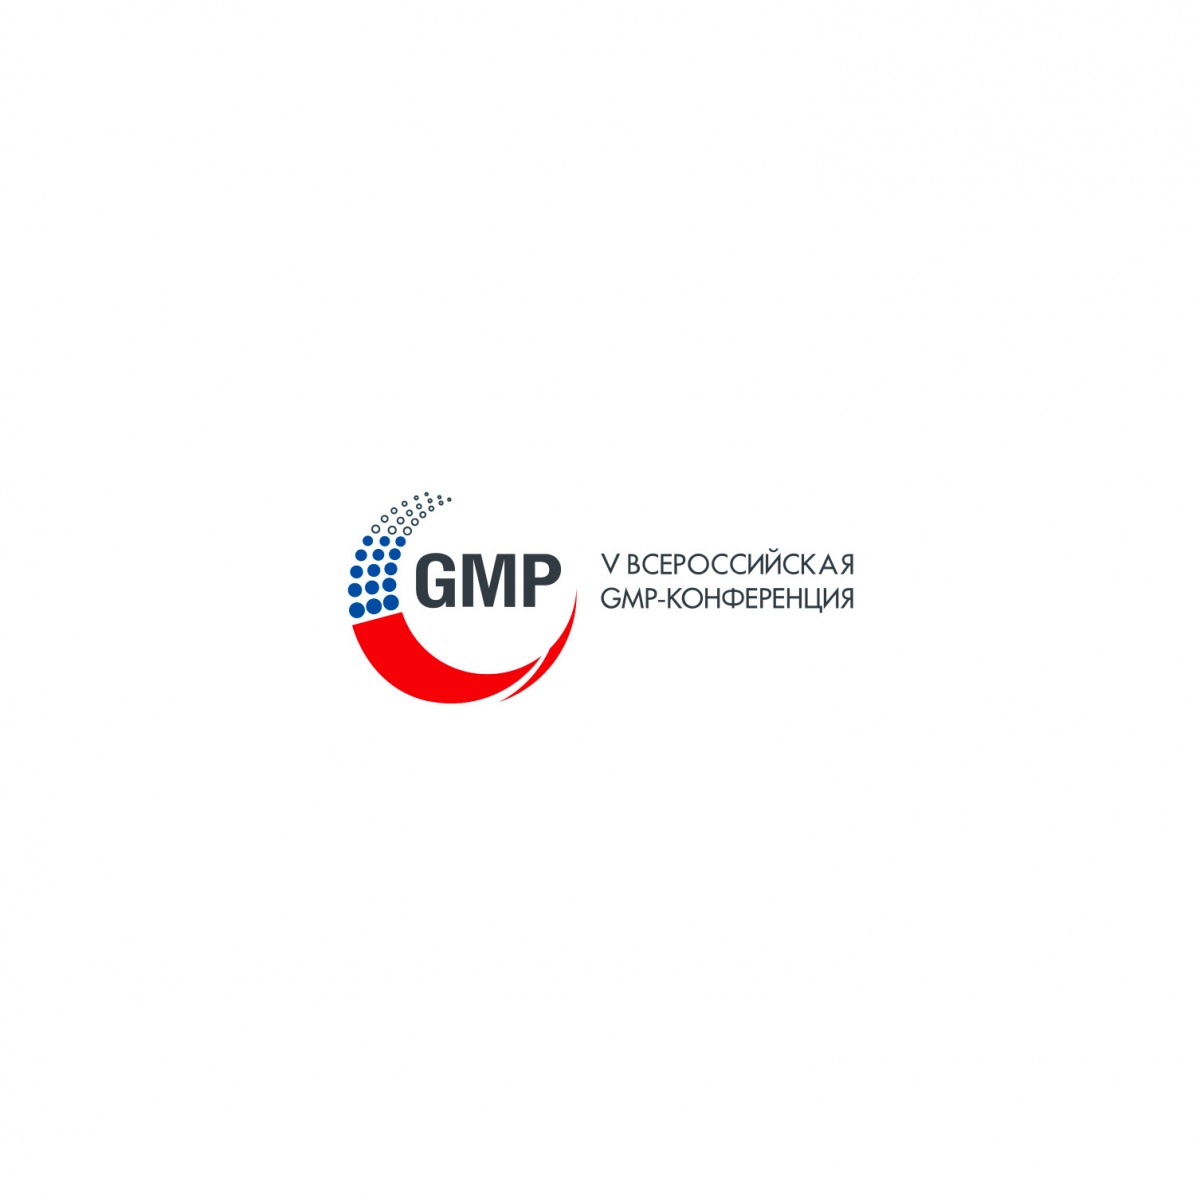 Invitation to the 5th National GMP Conference